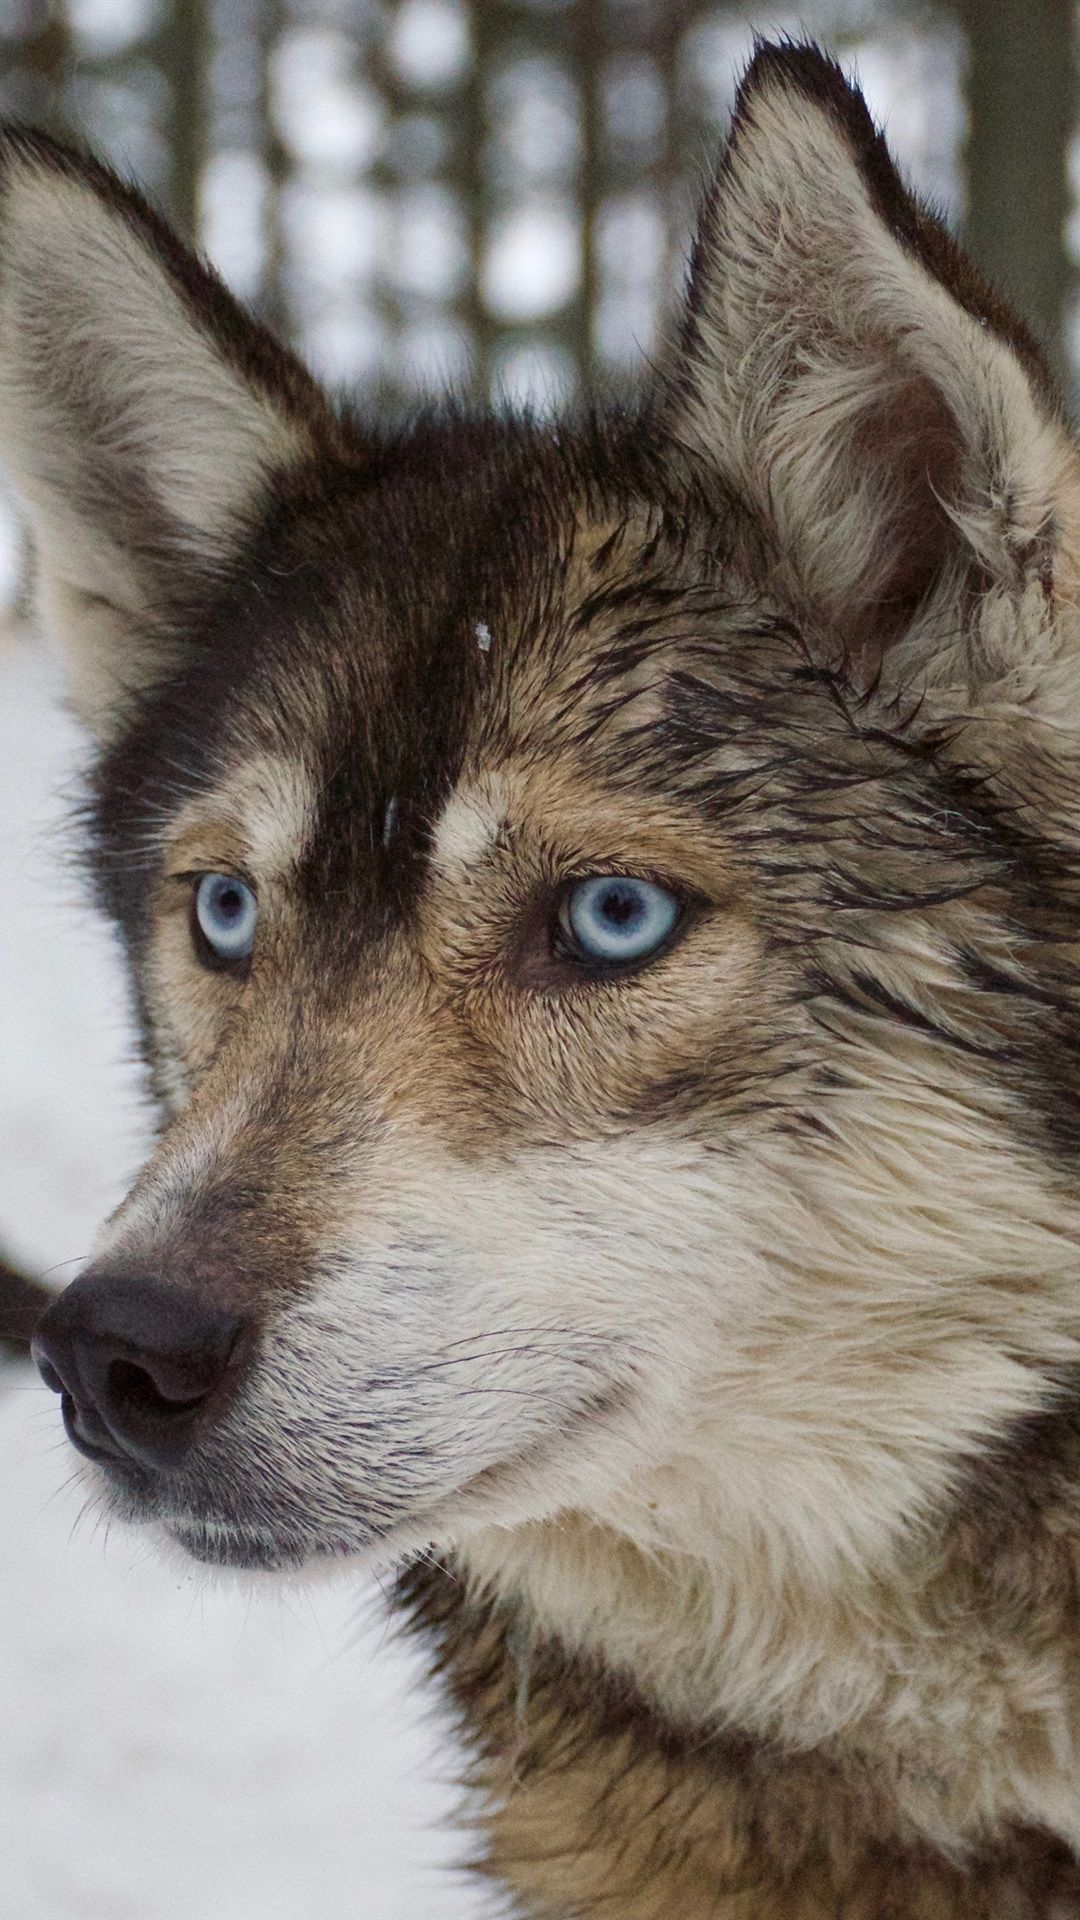 Blue Eyed Husky Dog, Winter, Snow 1080x1920 IPhone 8 7 6 6S Plus Wallpaper, Background, Picture, Image